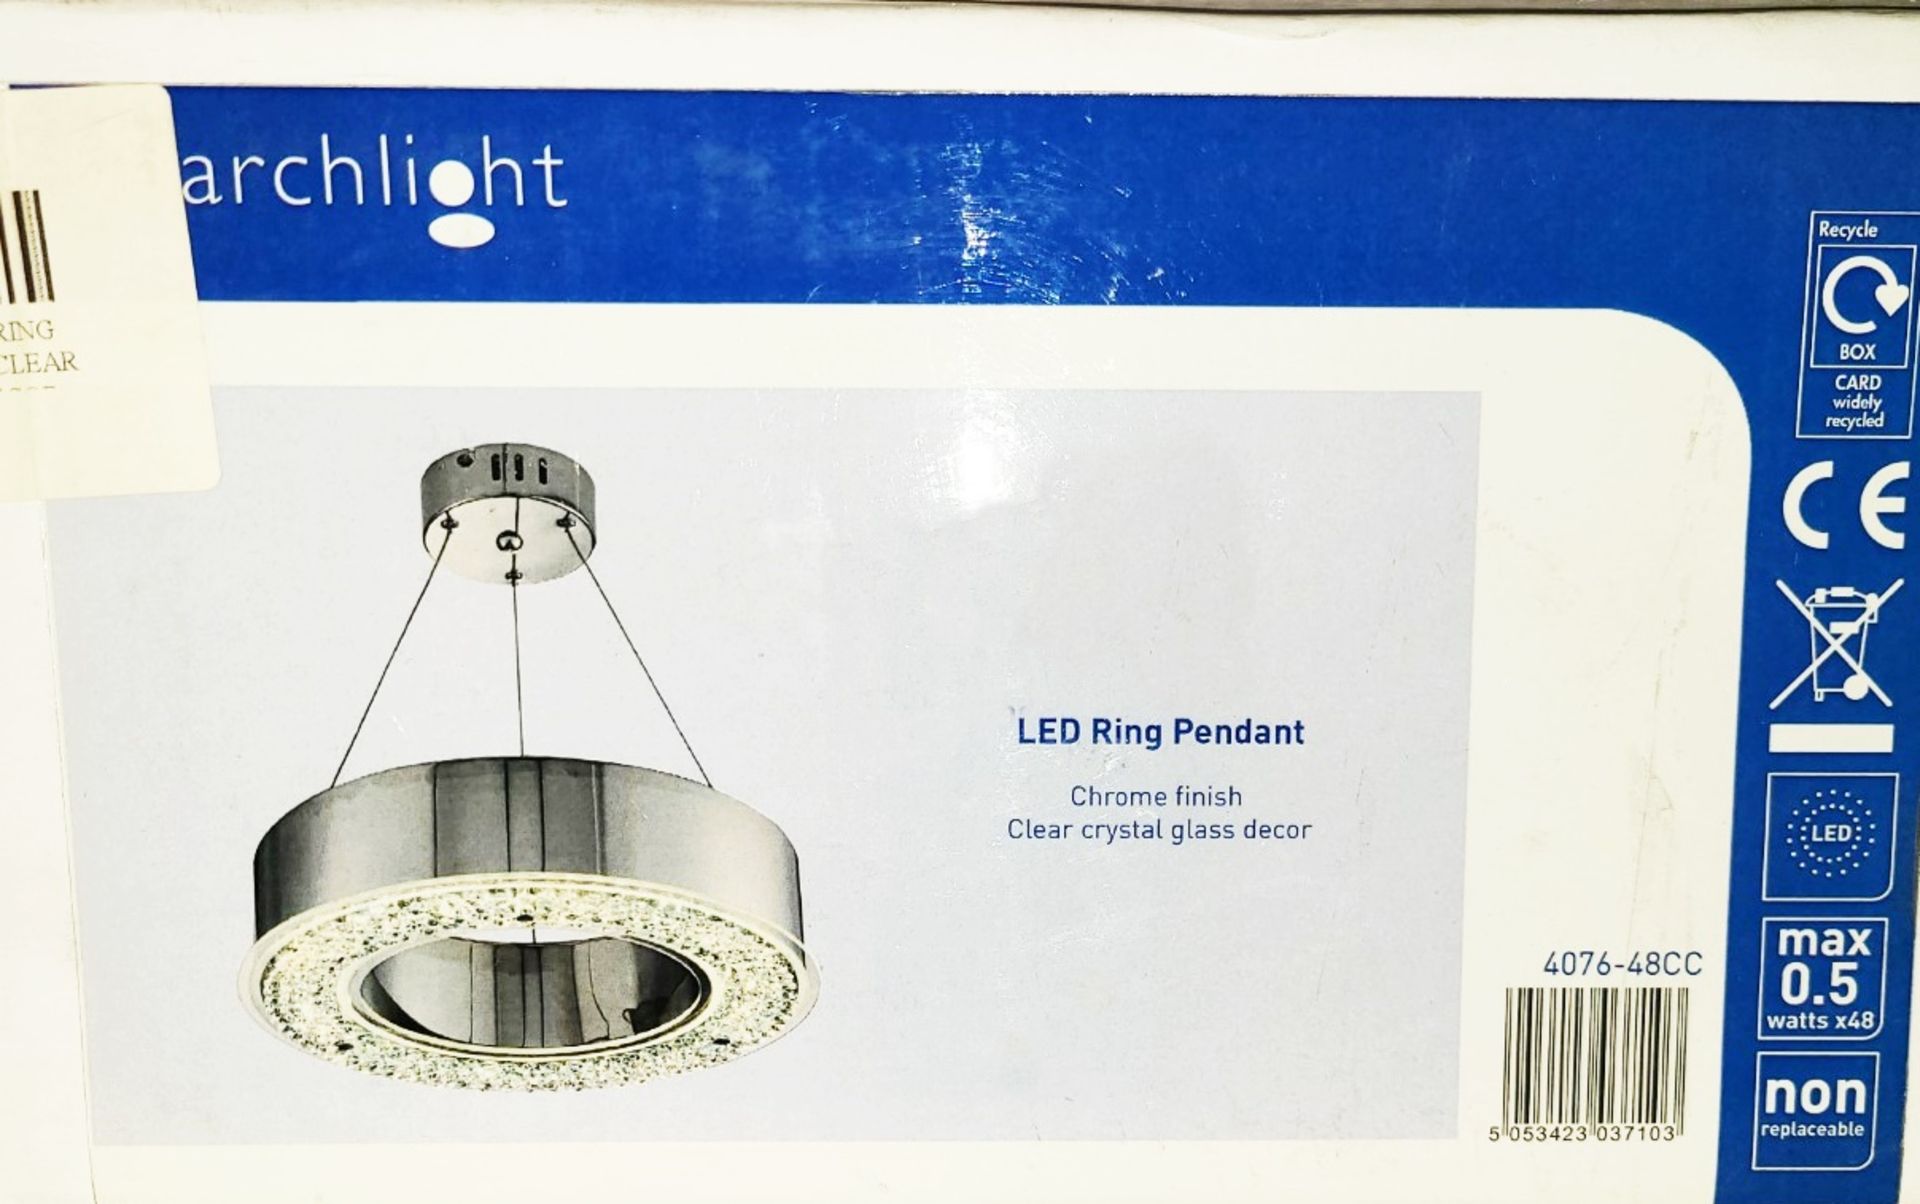 1 x SEARCHLIGHT Halo LED Ring Pendant In Polished Chrome Finish & Clear Crystal Glass Decoration